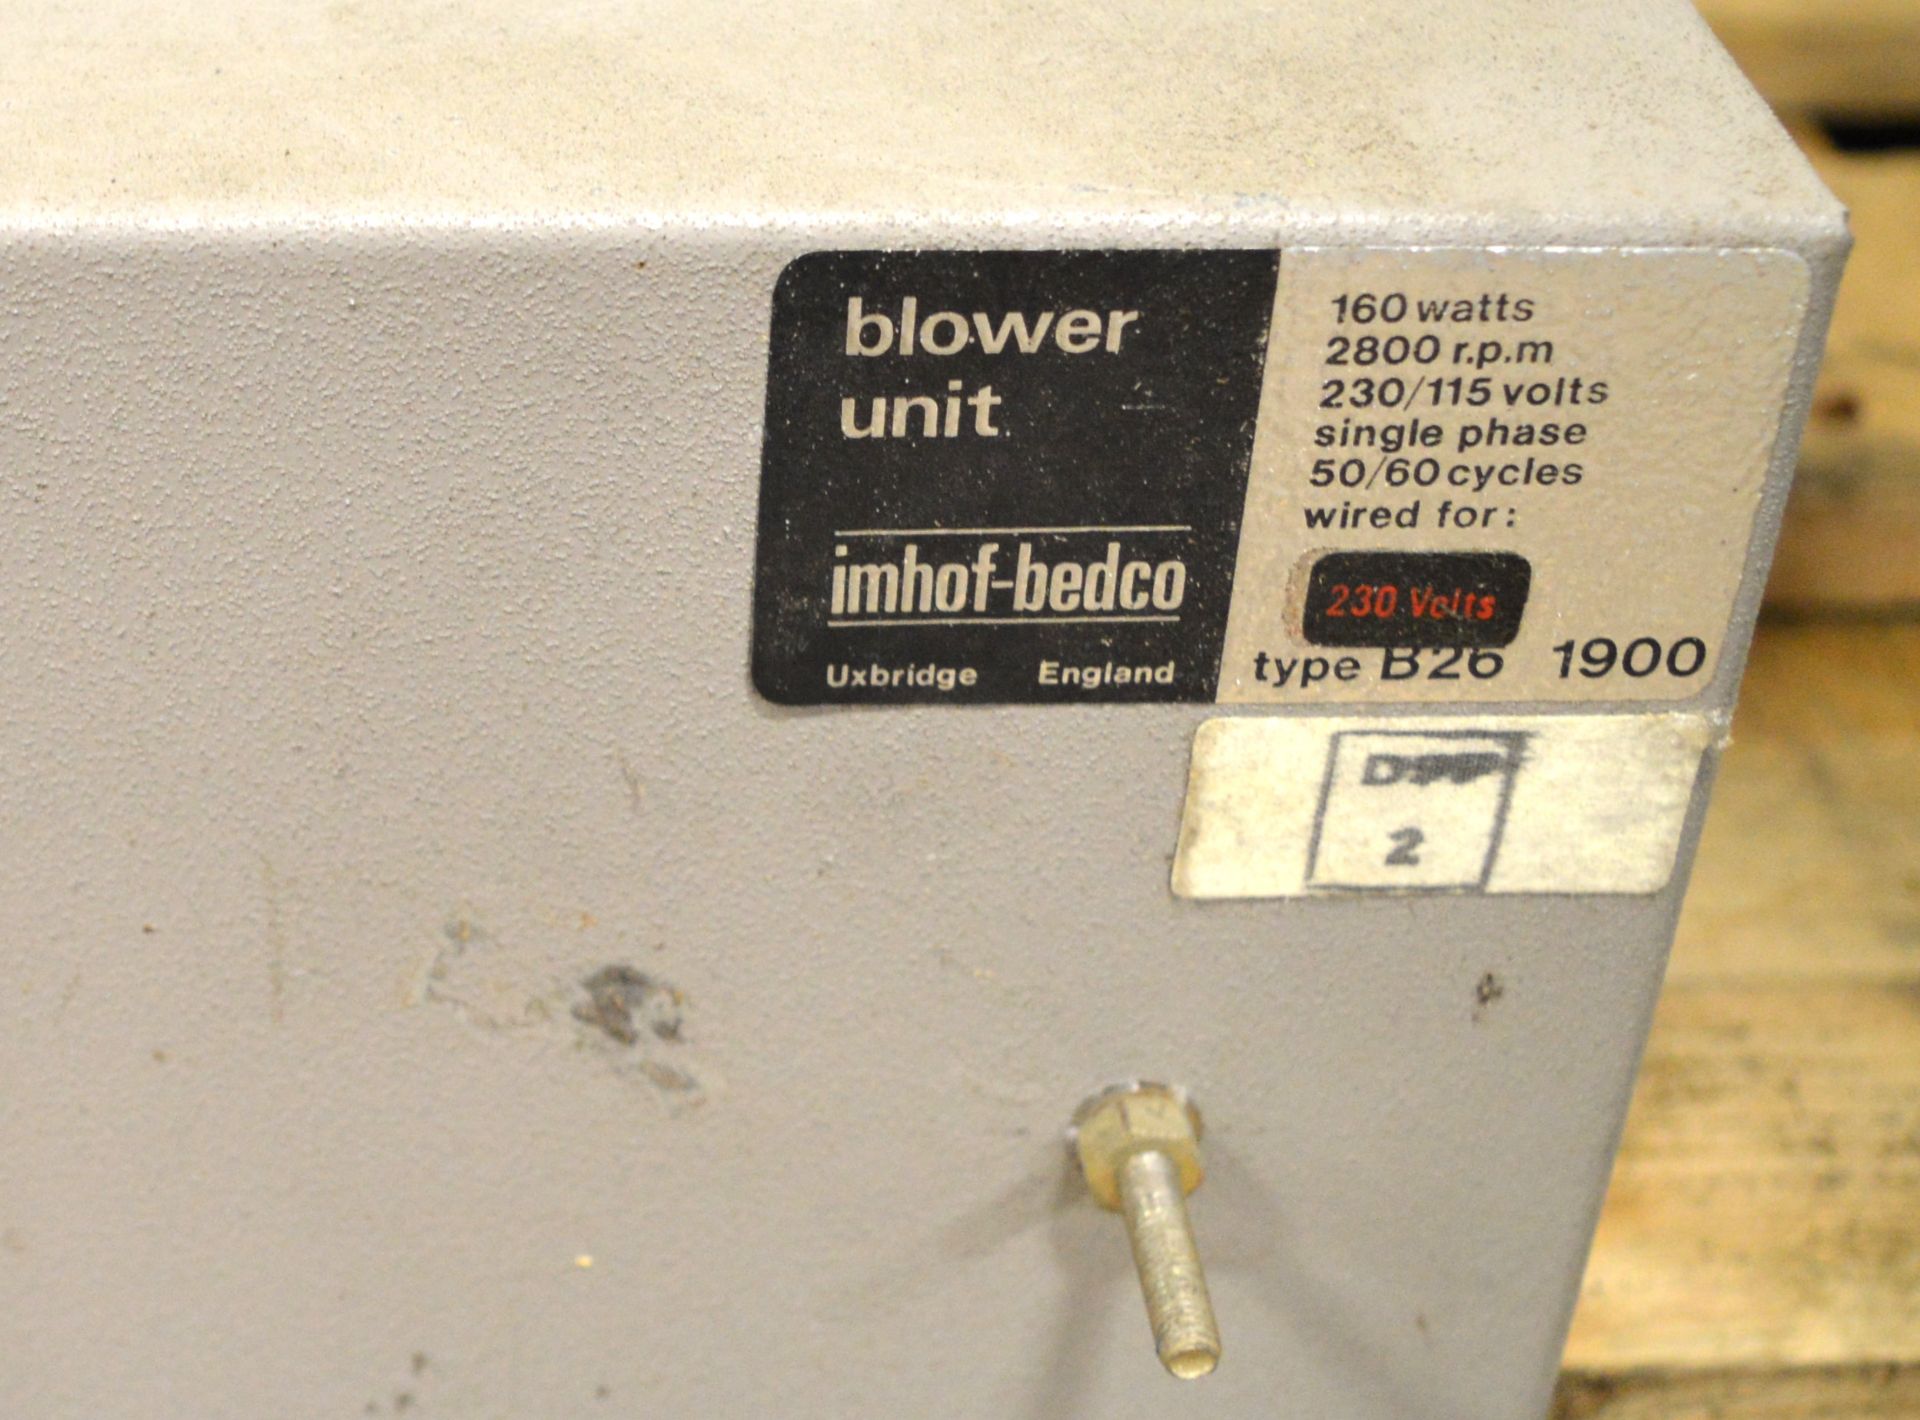 Imhof-Bedco Blower Unit. - Image 2 of 2